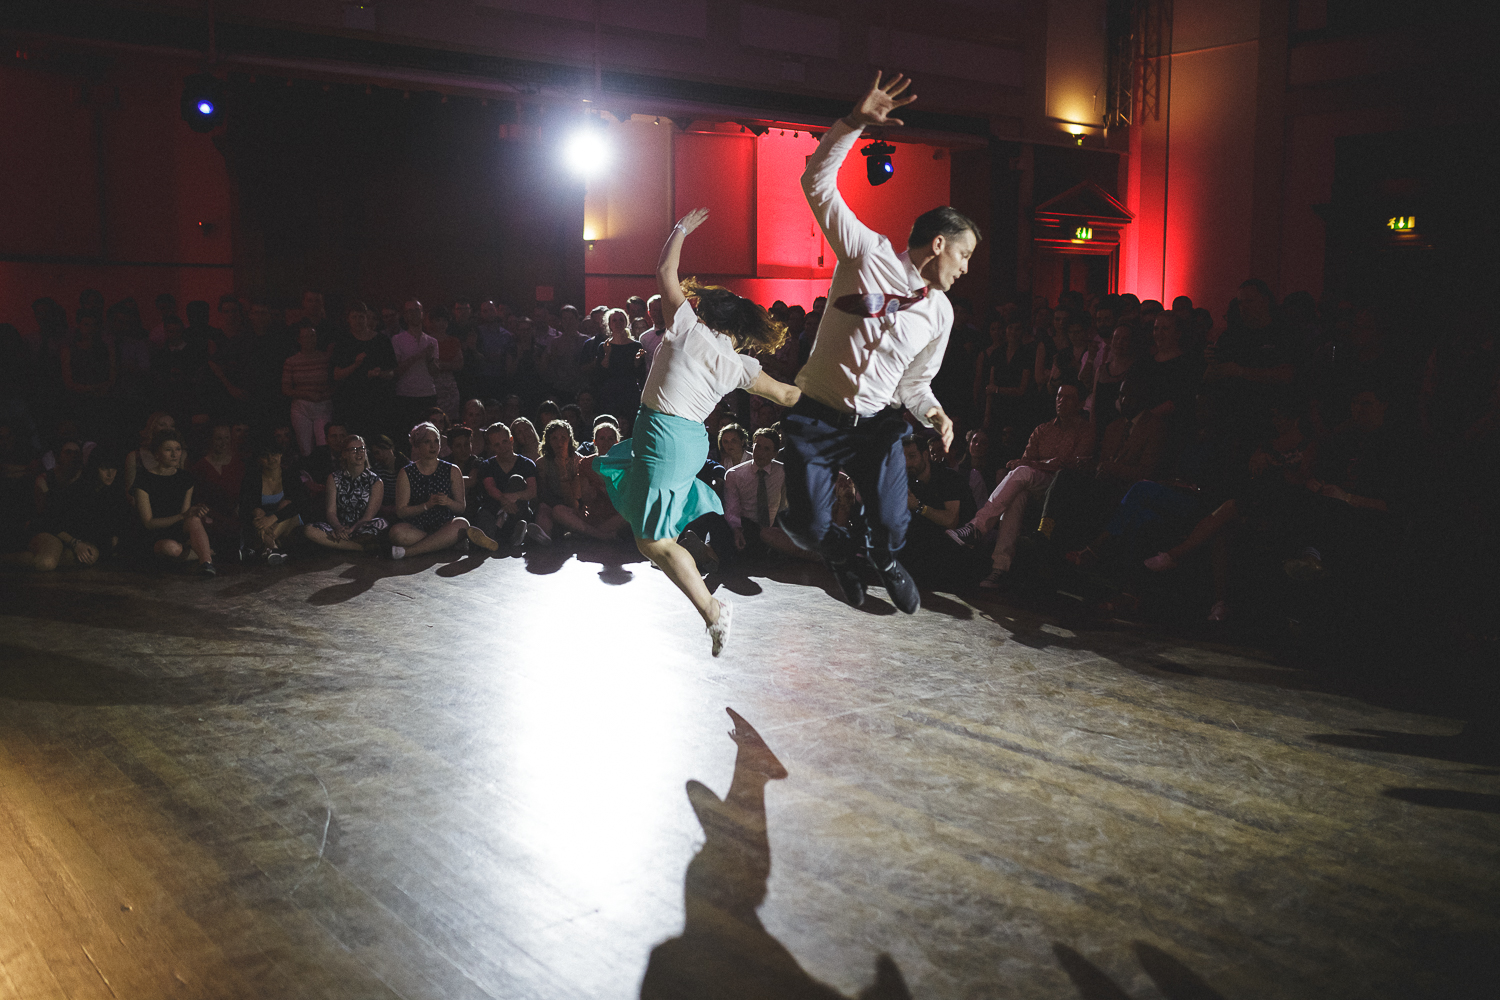  The London Swing Festival 2015 - The Opening Party. Photo Credit: For Dancers Only (http://d.pr/1fEEY) - http://www.ebobrie.com/london-swing-festival-2015/ 